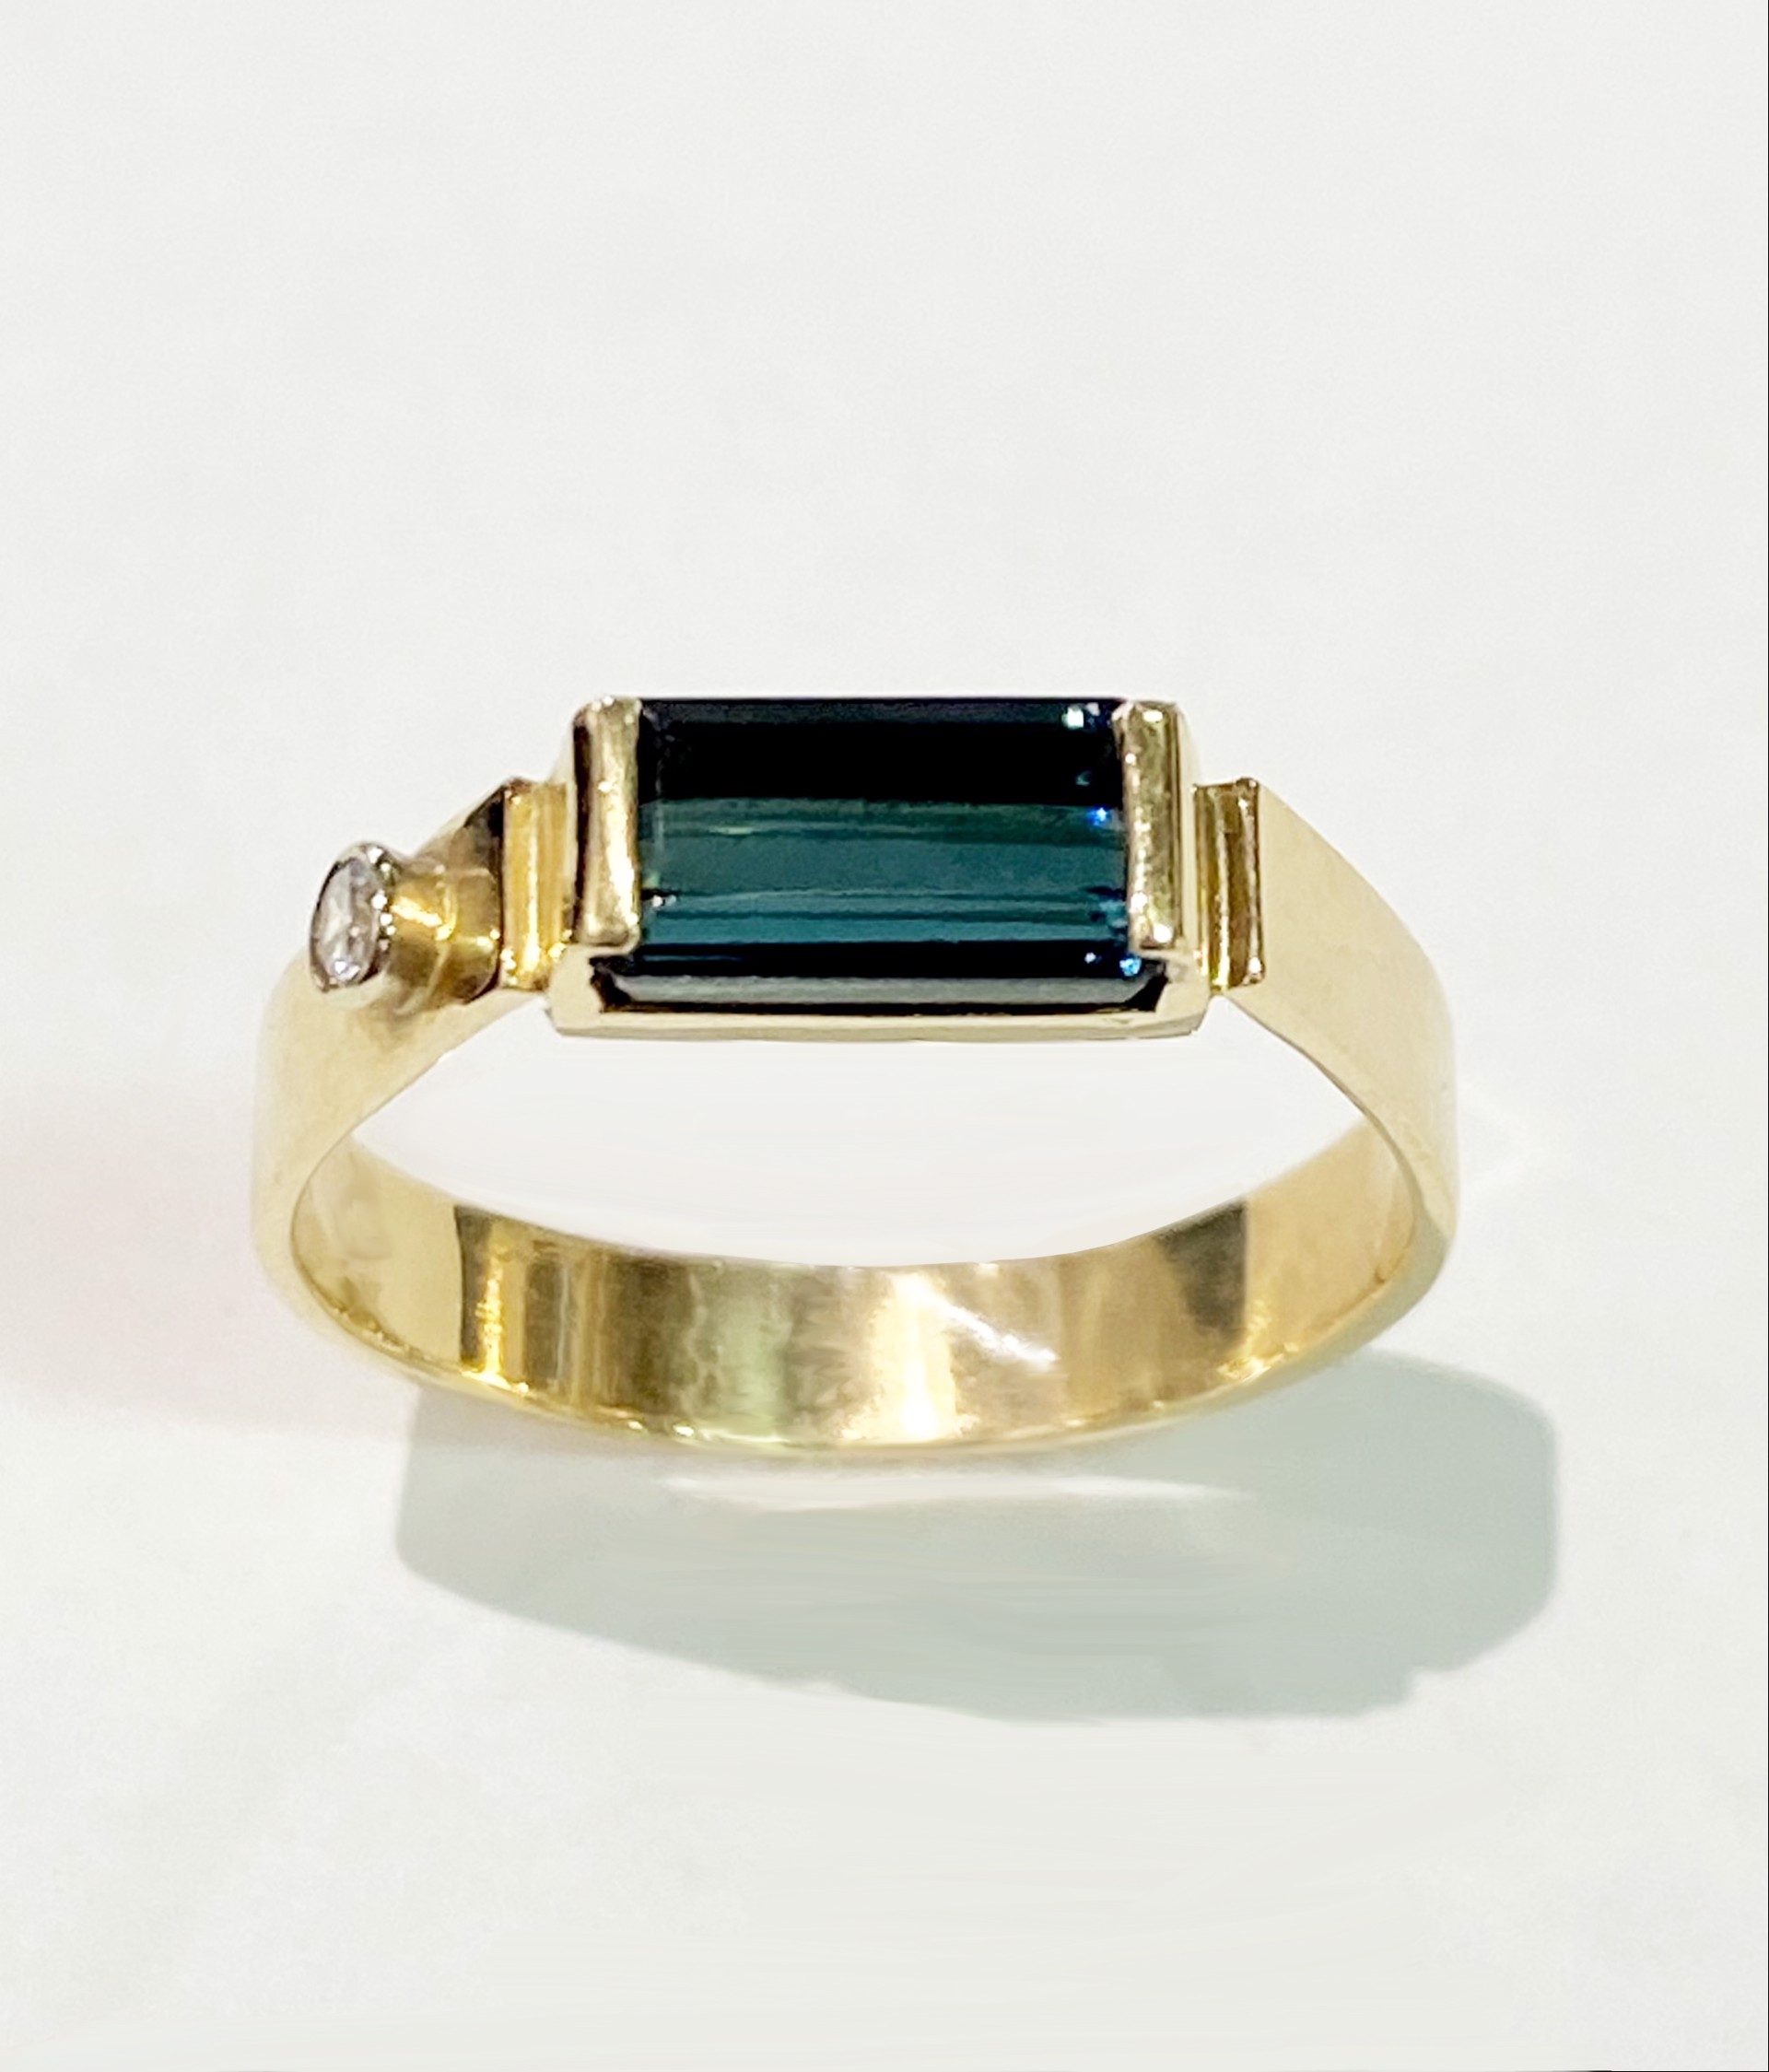 14K Yellow Gold, Tourmaline & Diamond Ring by D'ETTE DELFORGE